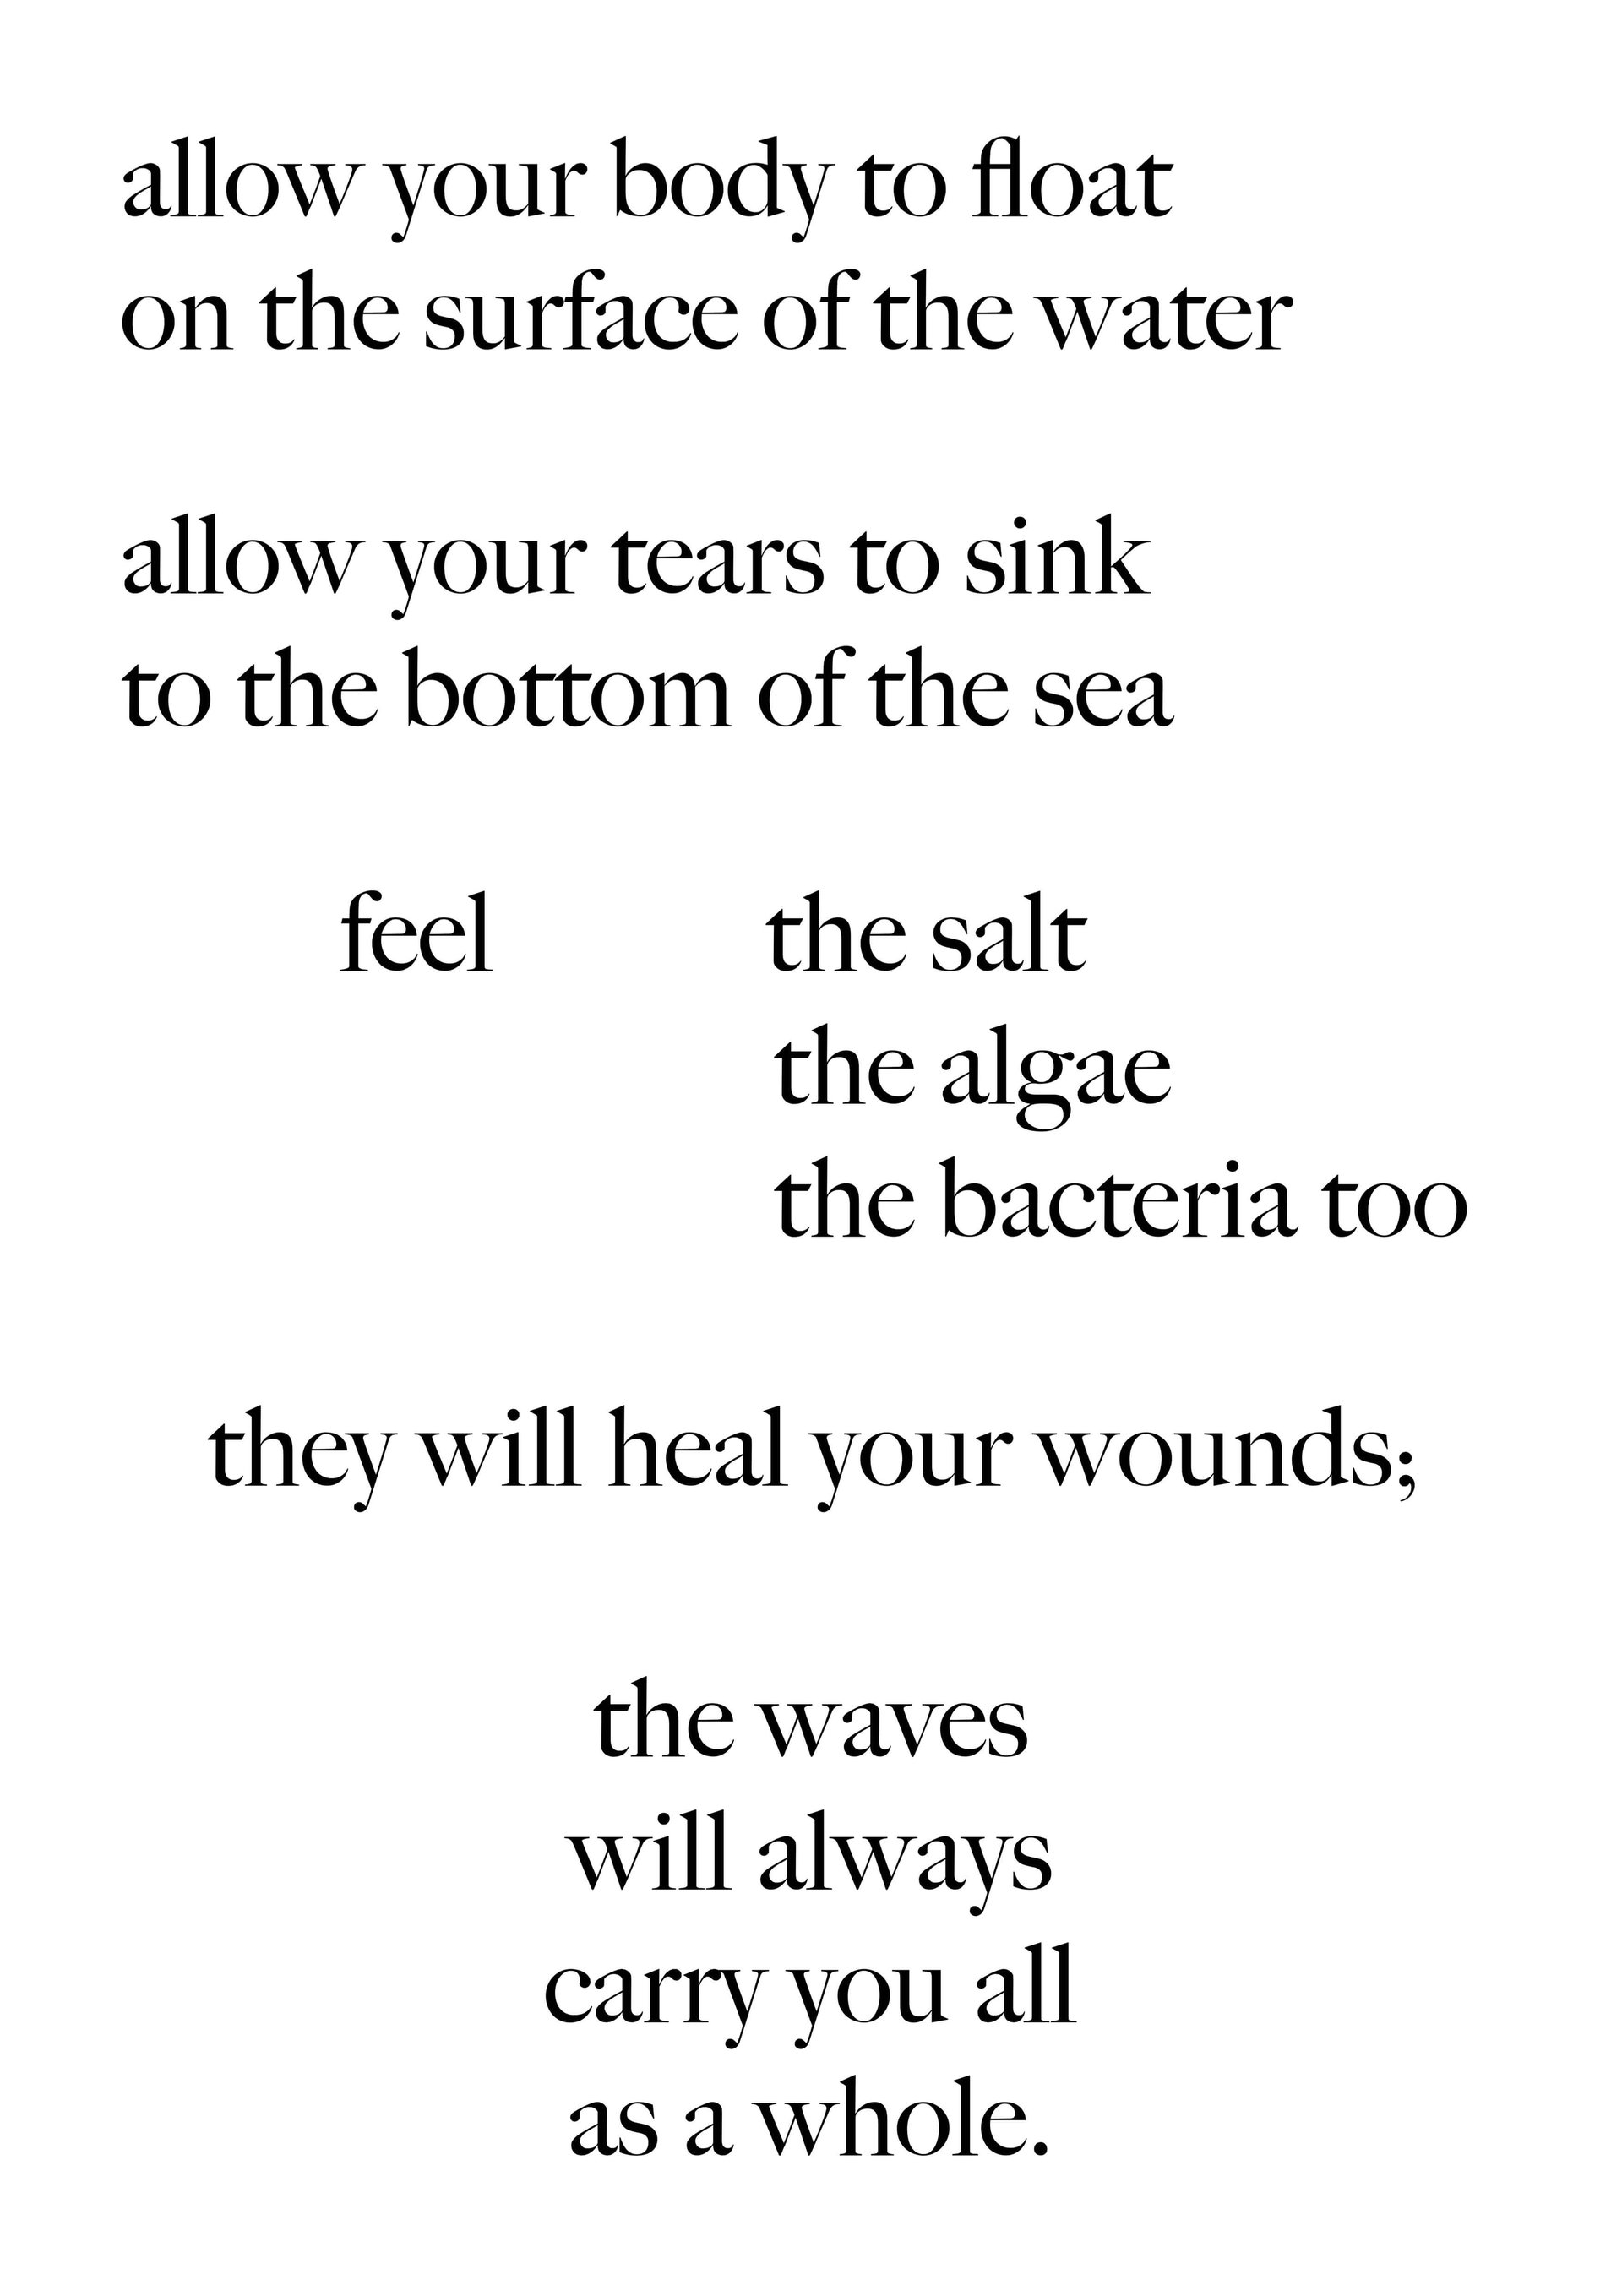 The Waves will carry us